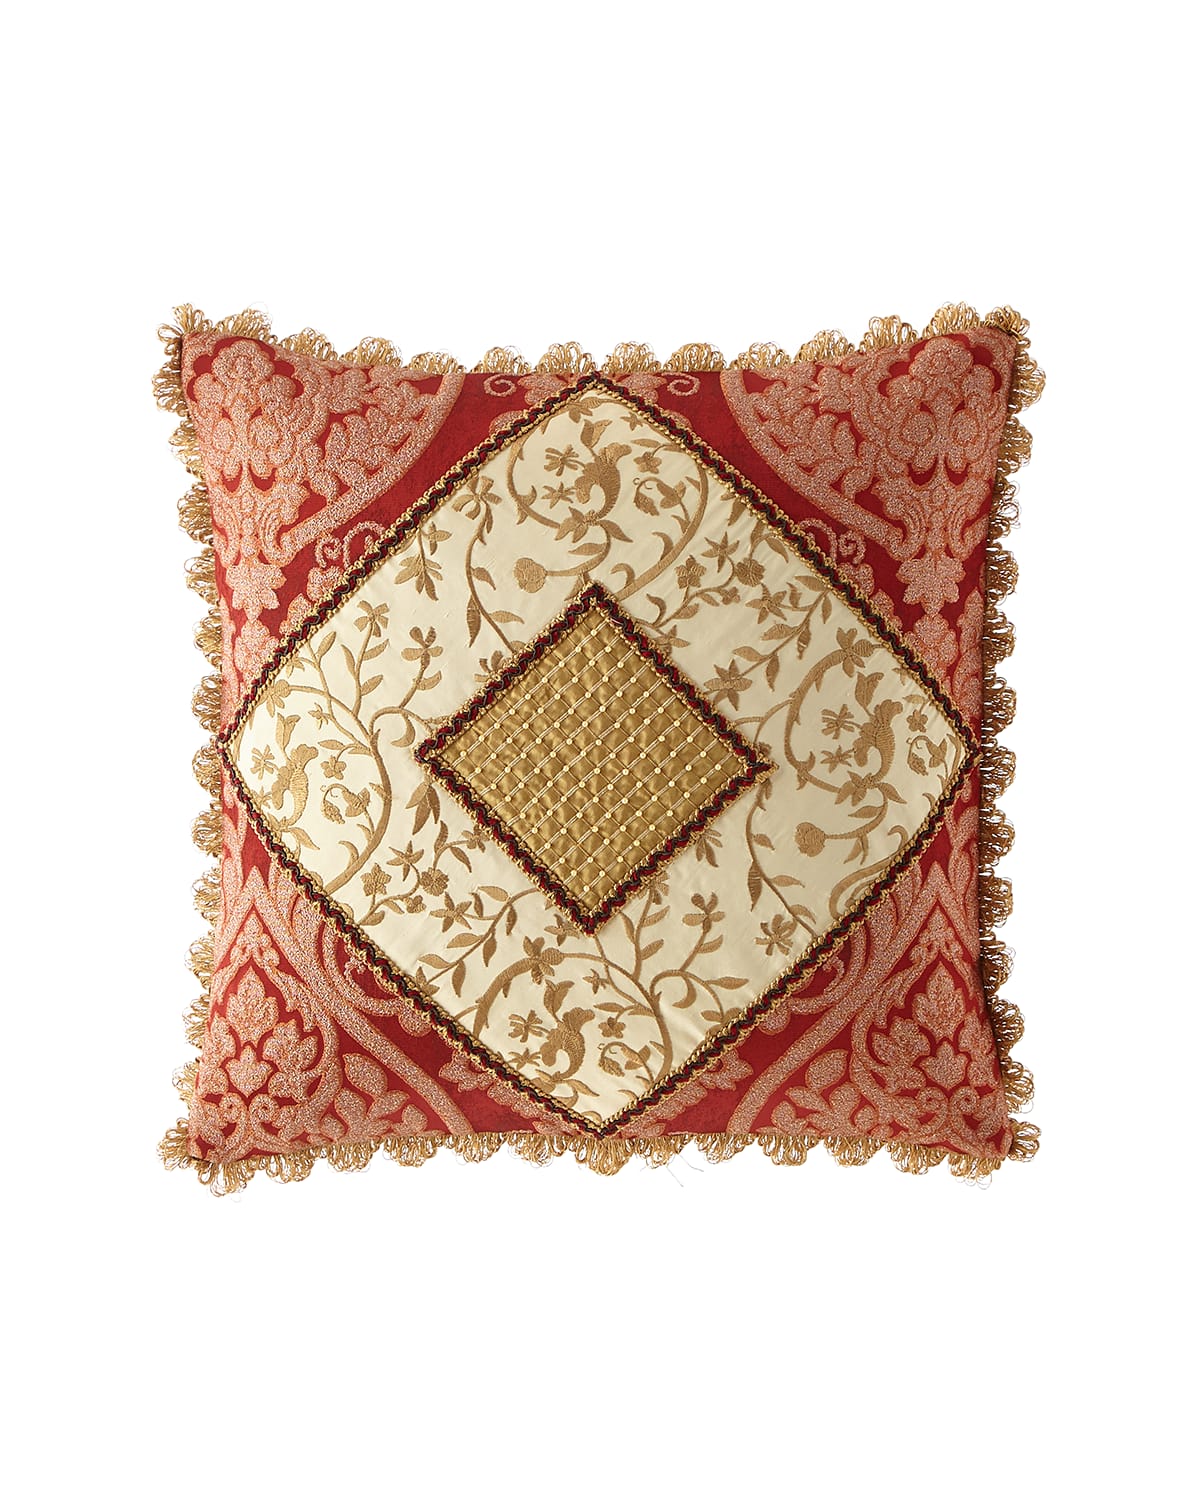 Image Sweet Dreams Fontenay Pieced Boutique Pillow with Scallop Fringe